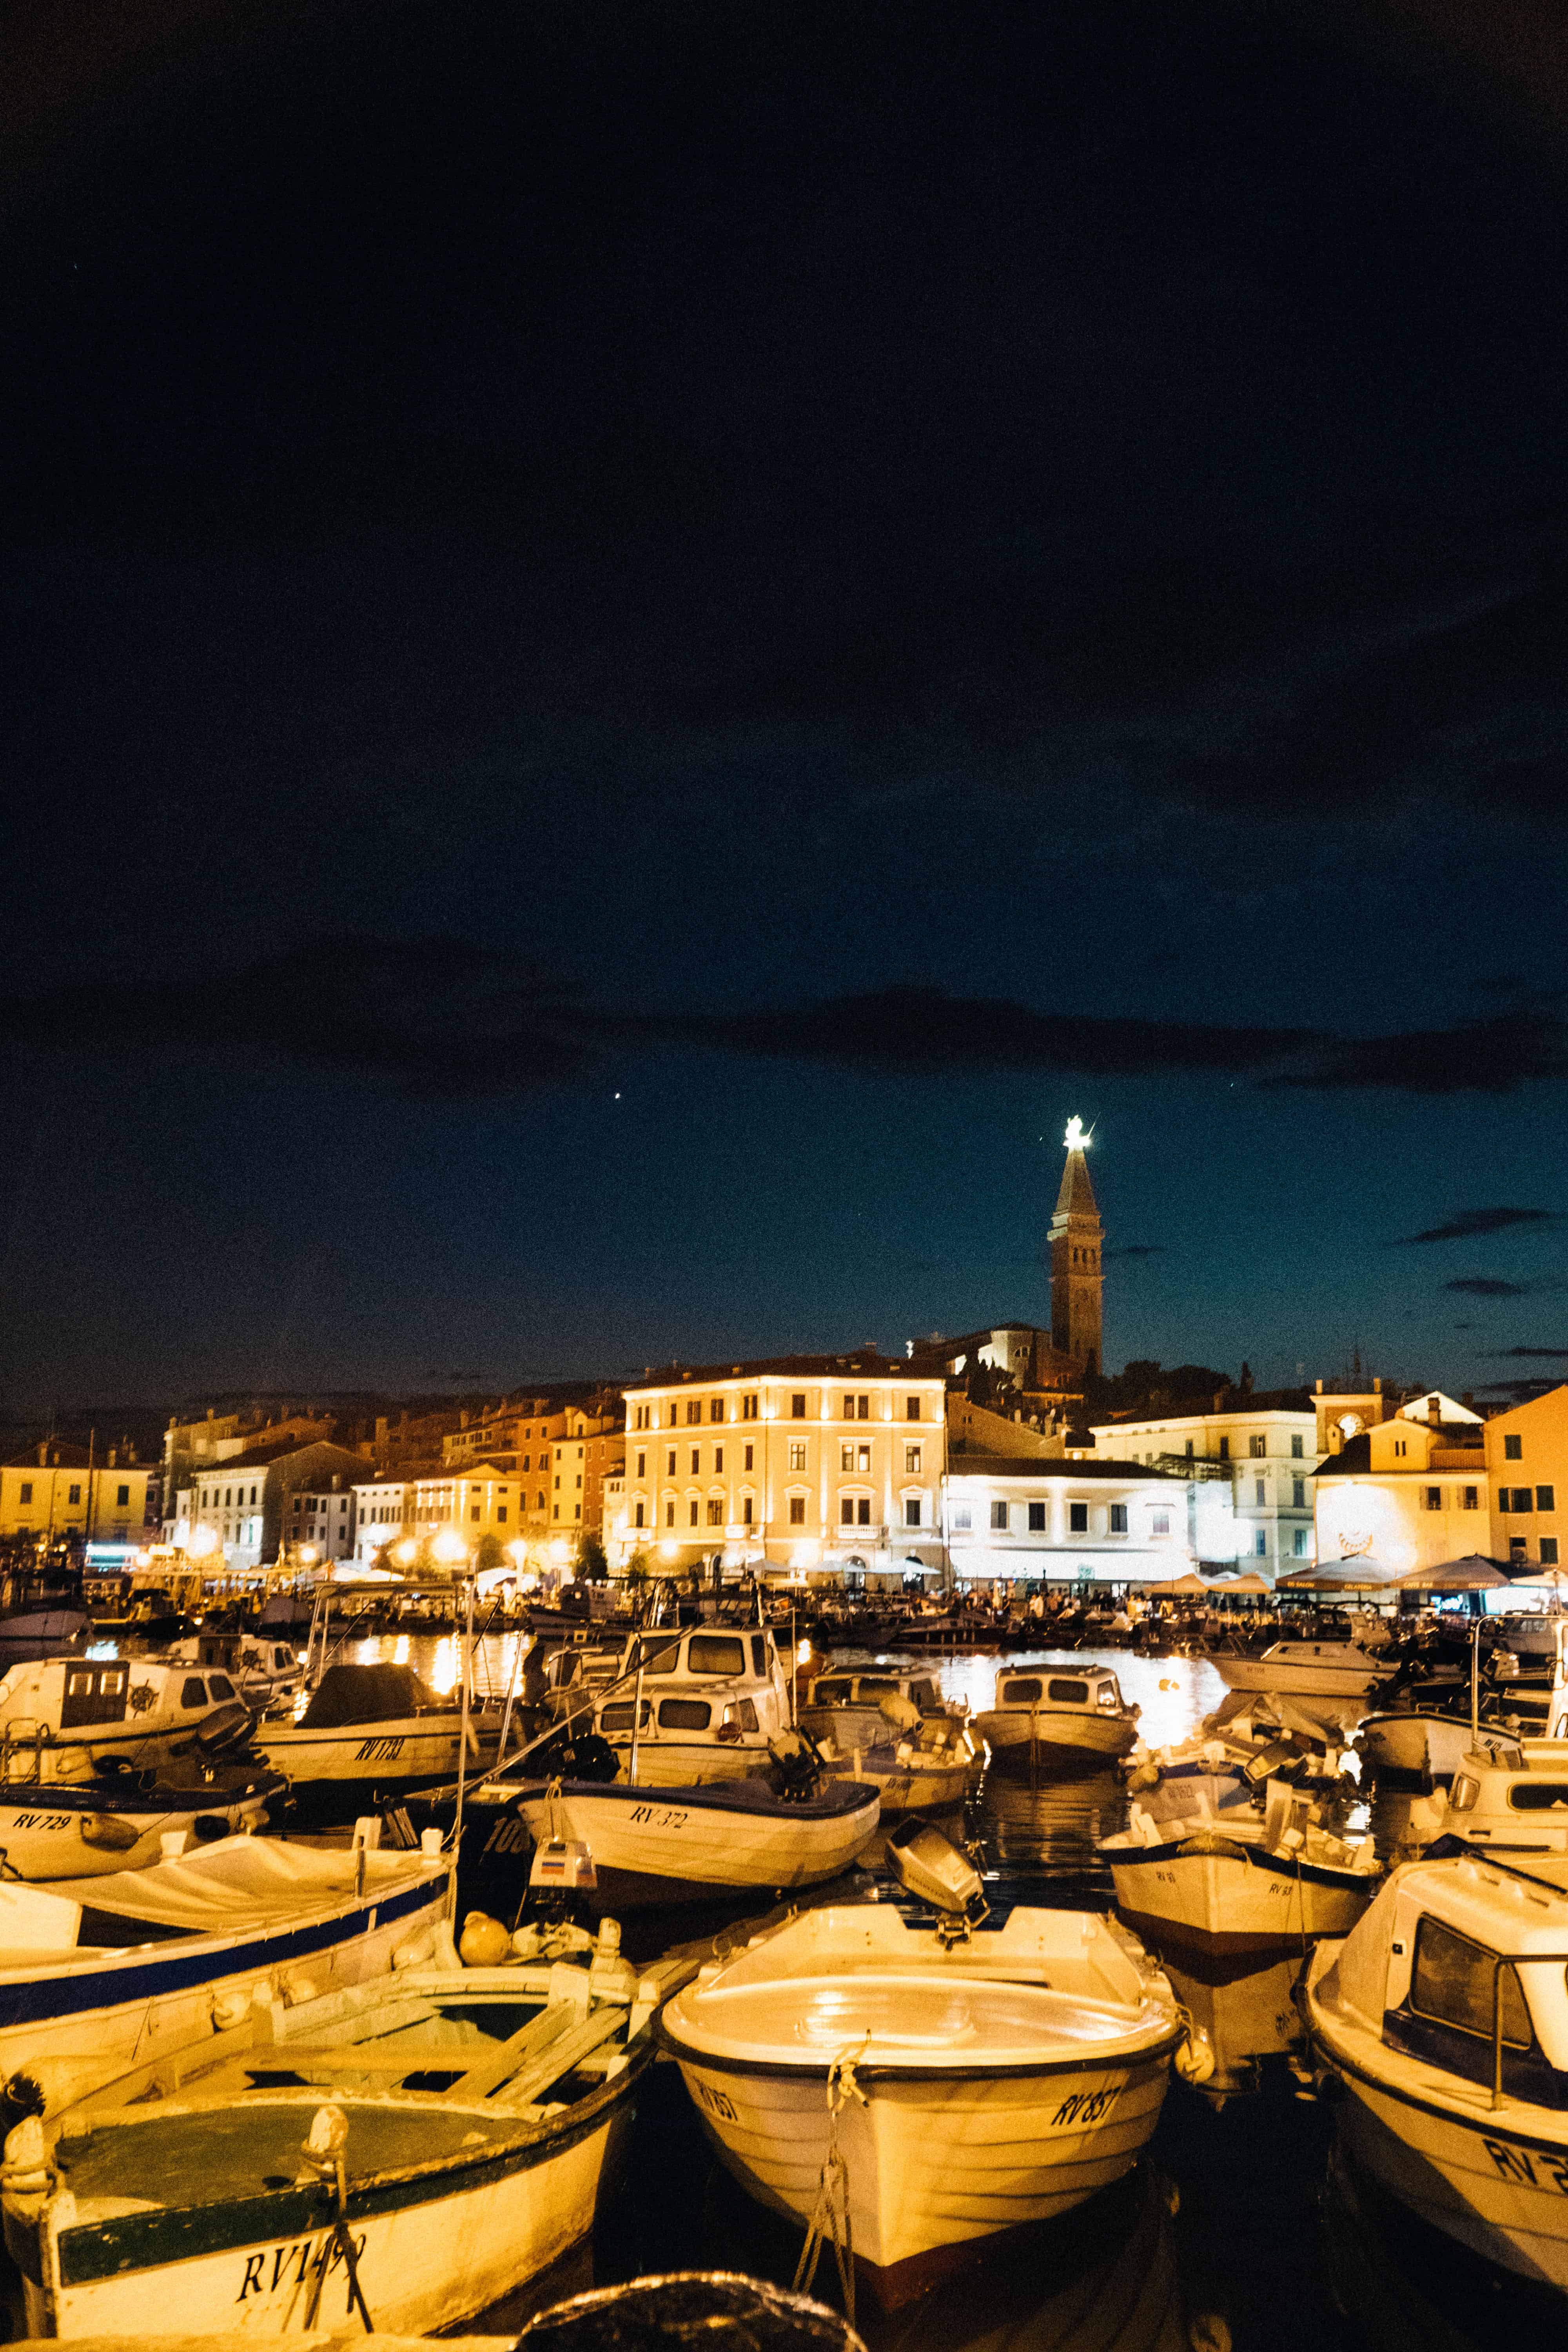 How to Spend 2 Days in Istria, Croatia | Views of Rovinj | The Republic of Rose | 48 Hours Exploring Pula and Rovinj | #Pula #Rovinj #Istria #Croatia